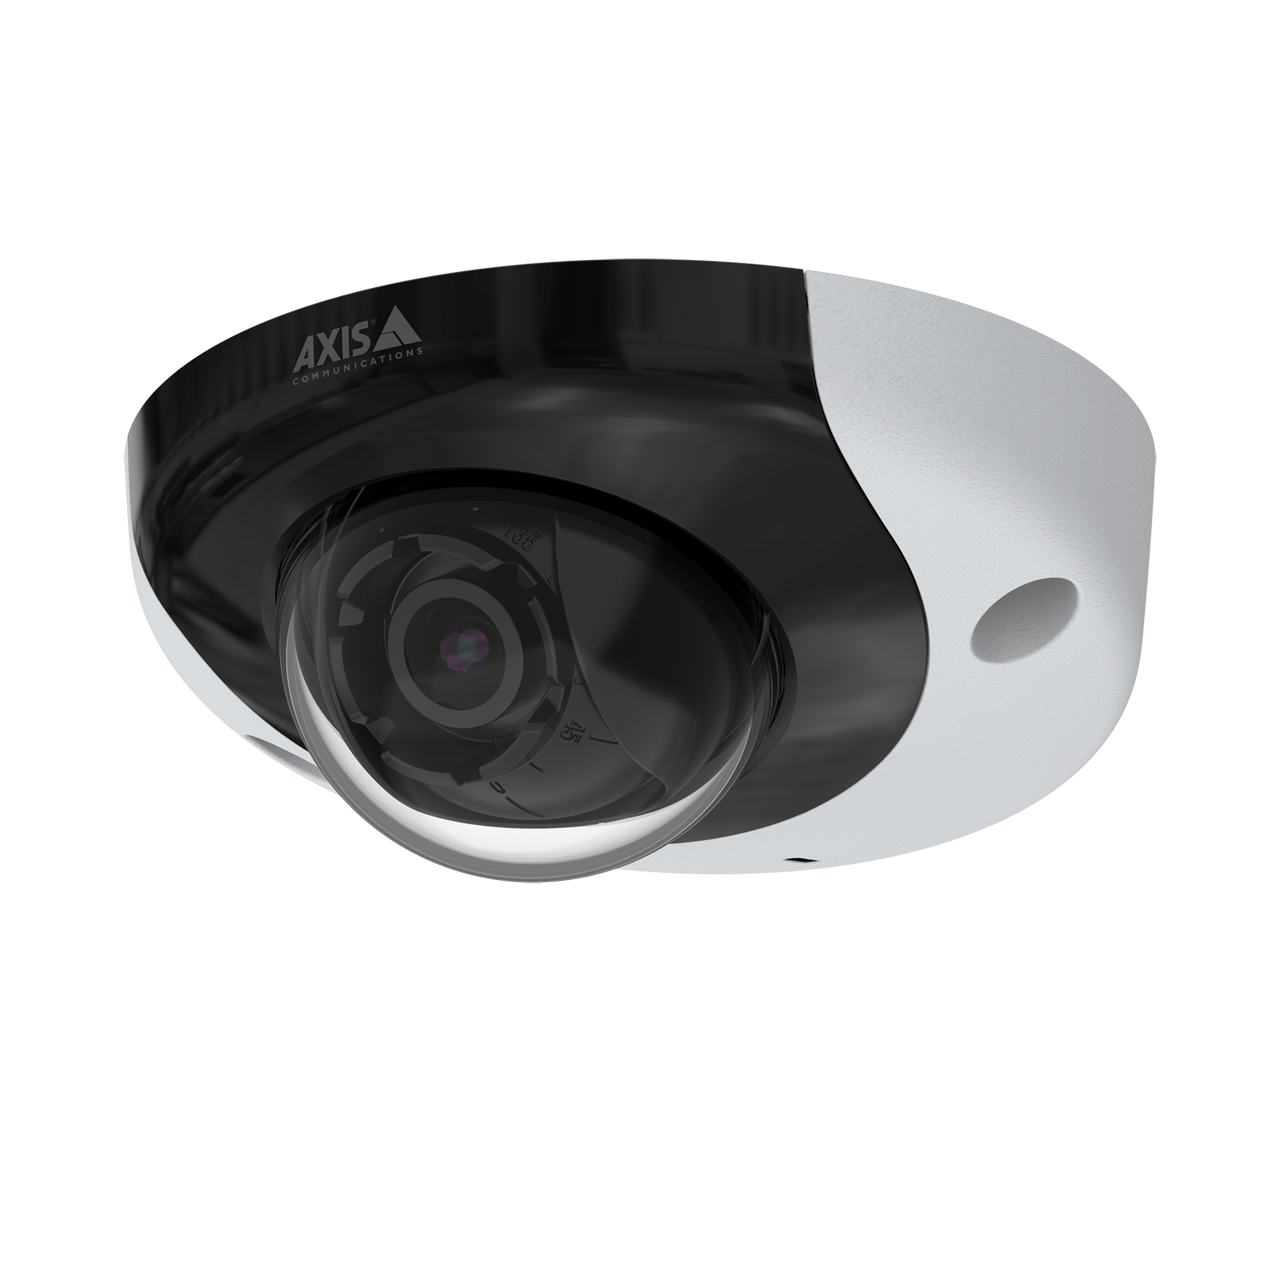 AXIS P3935-LR M12 Best-in-class dome with IR for advanced onboard surveillance